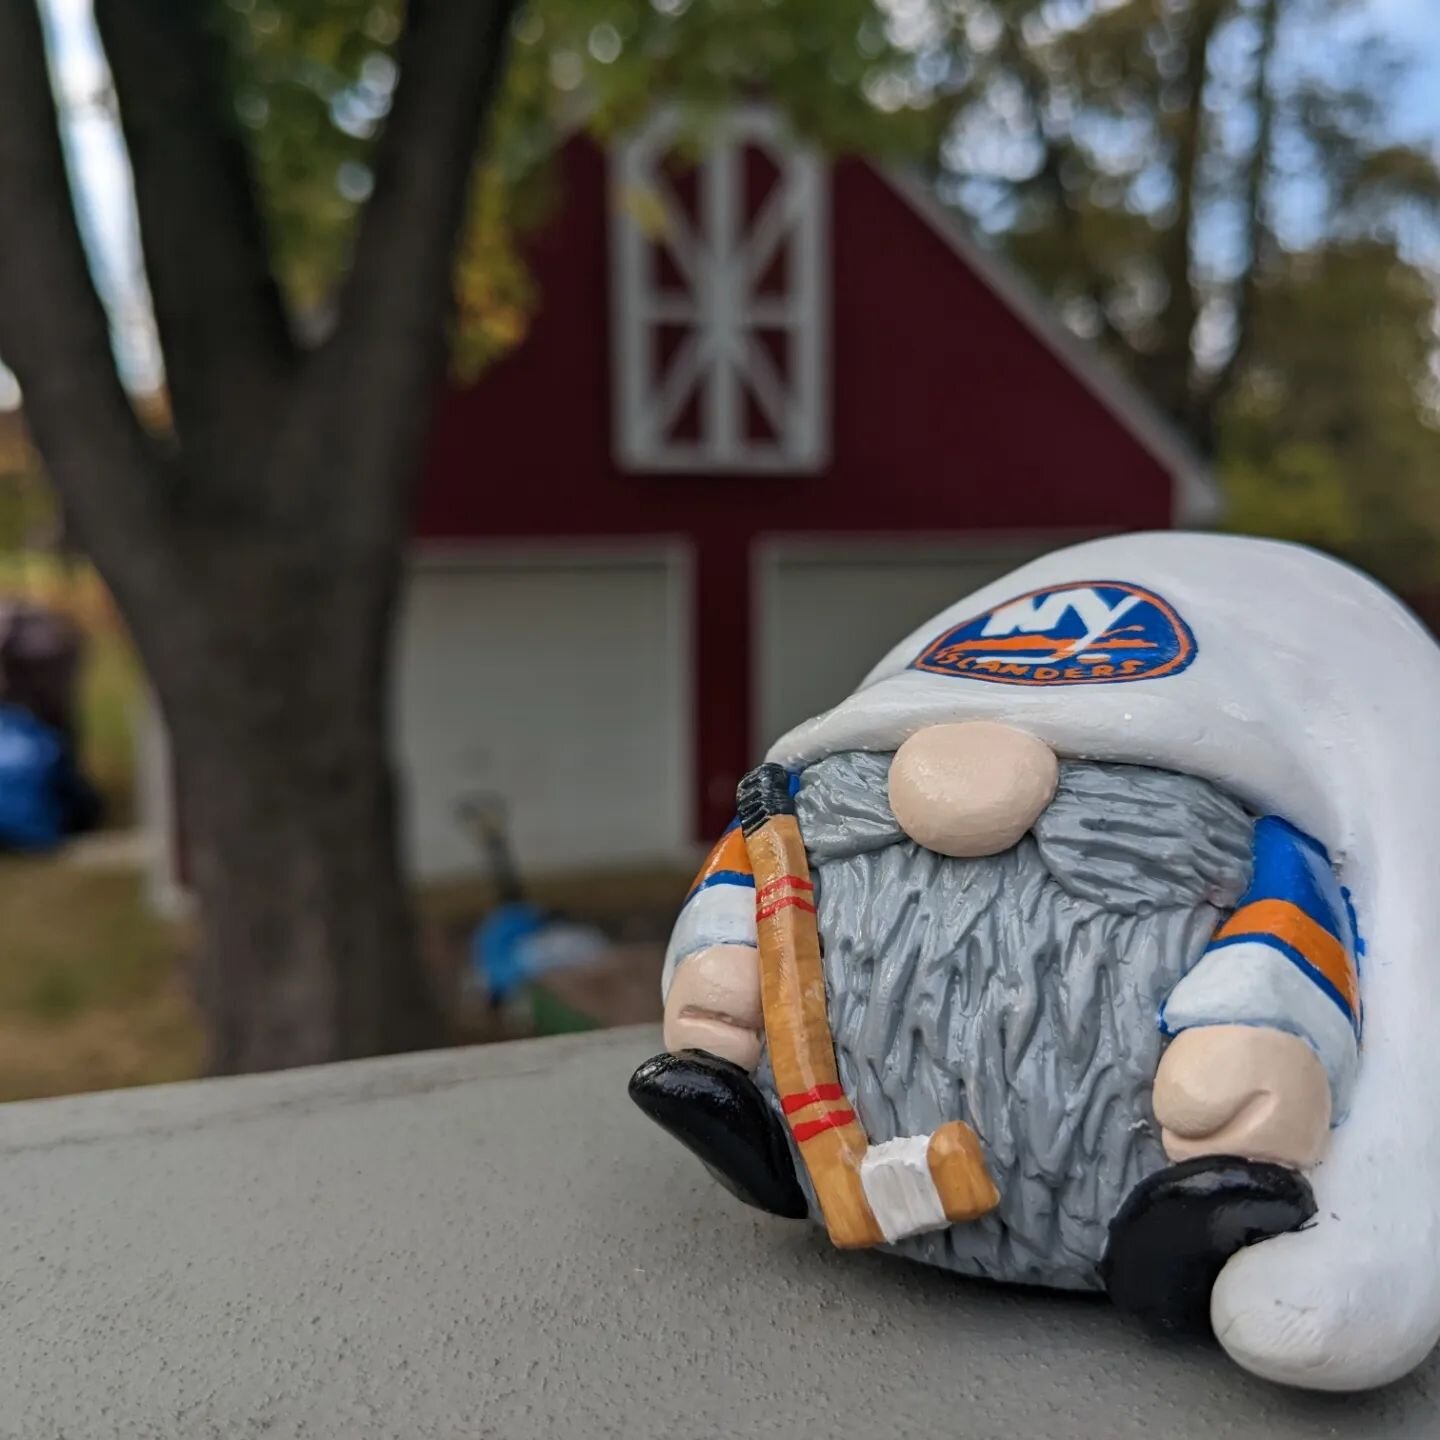 My buddy @wired_workshop sent me a #hockeygnome being of the same fanbase made by the very talented @amandaleeartistries The detailed hand painted logo is so impressive. Thanks Mario, he sits in a place of honor right next to the #smarthockeylight. H